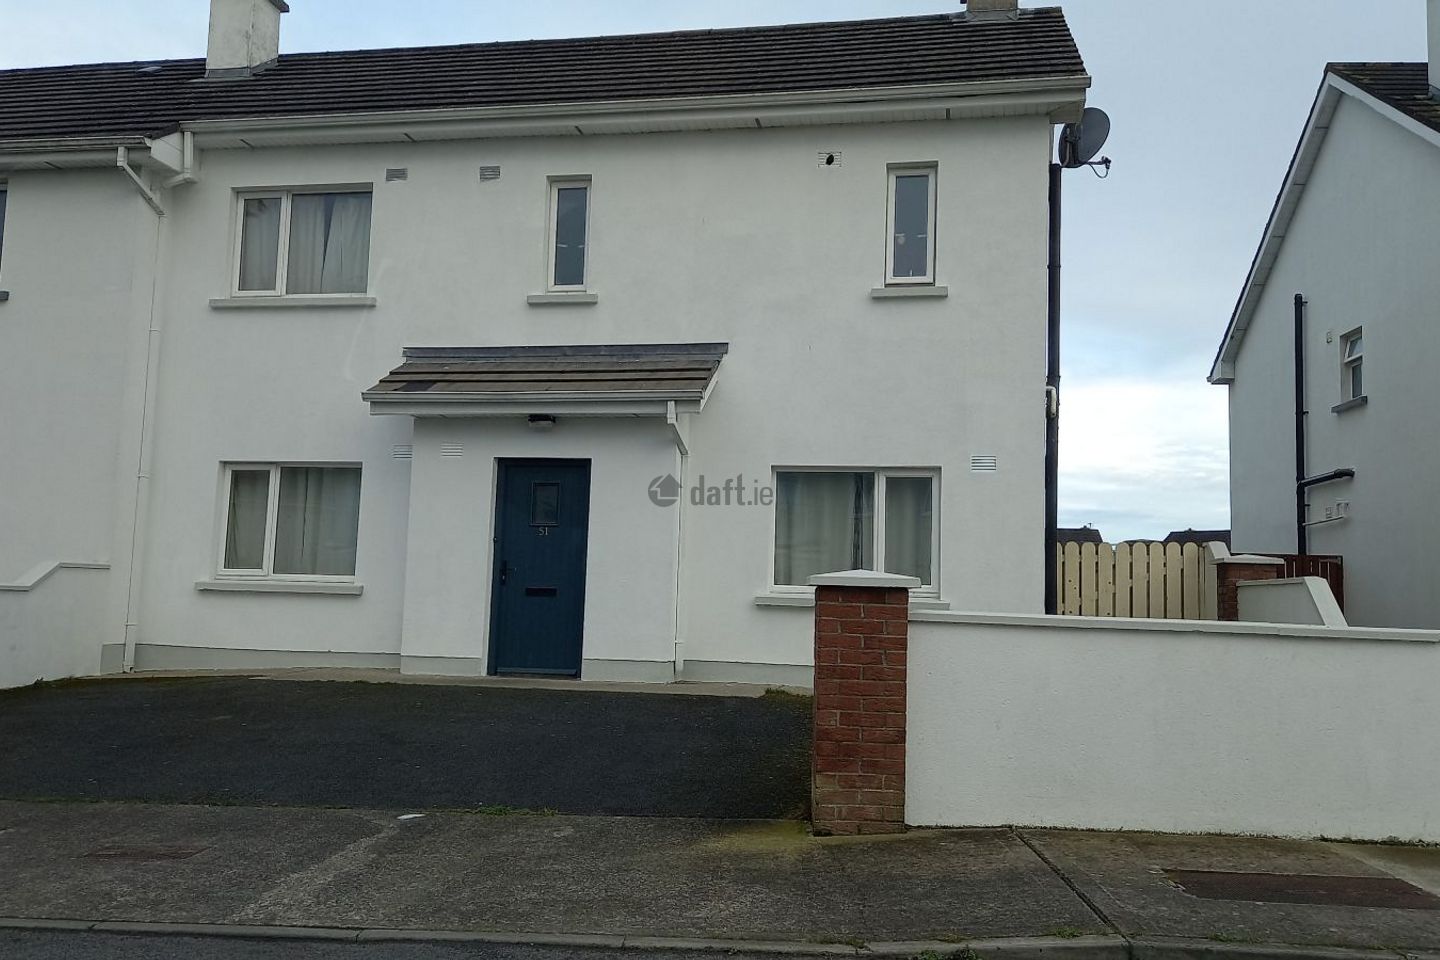  Ashgrove, Monadreen, Thurles, Co. Tipperary, Thurles, Co. Tipperary